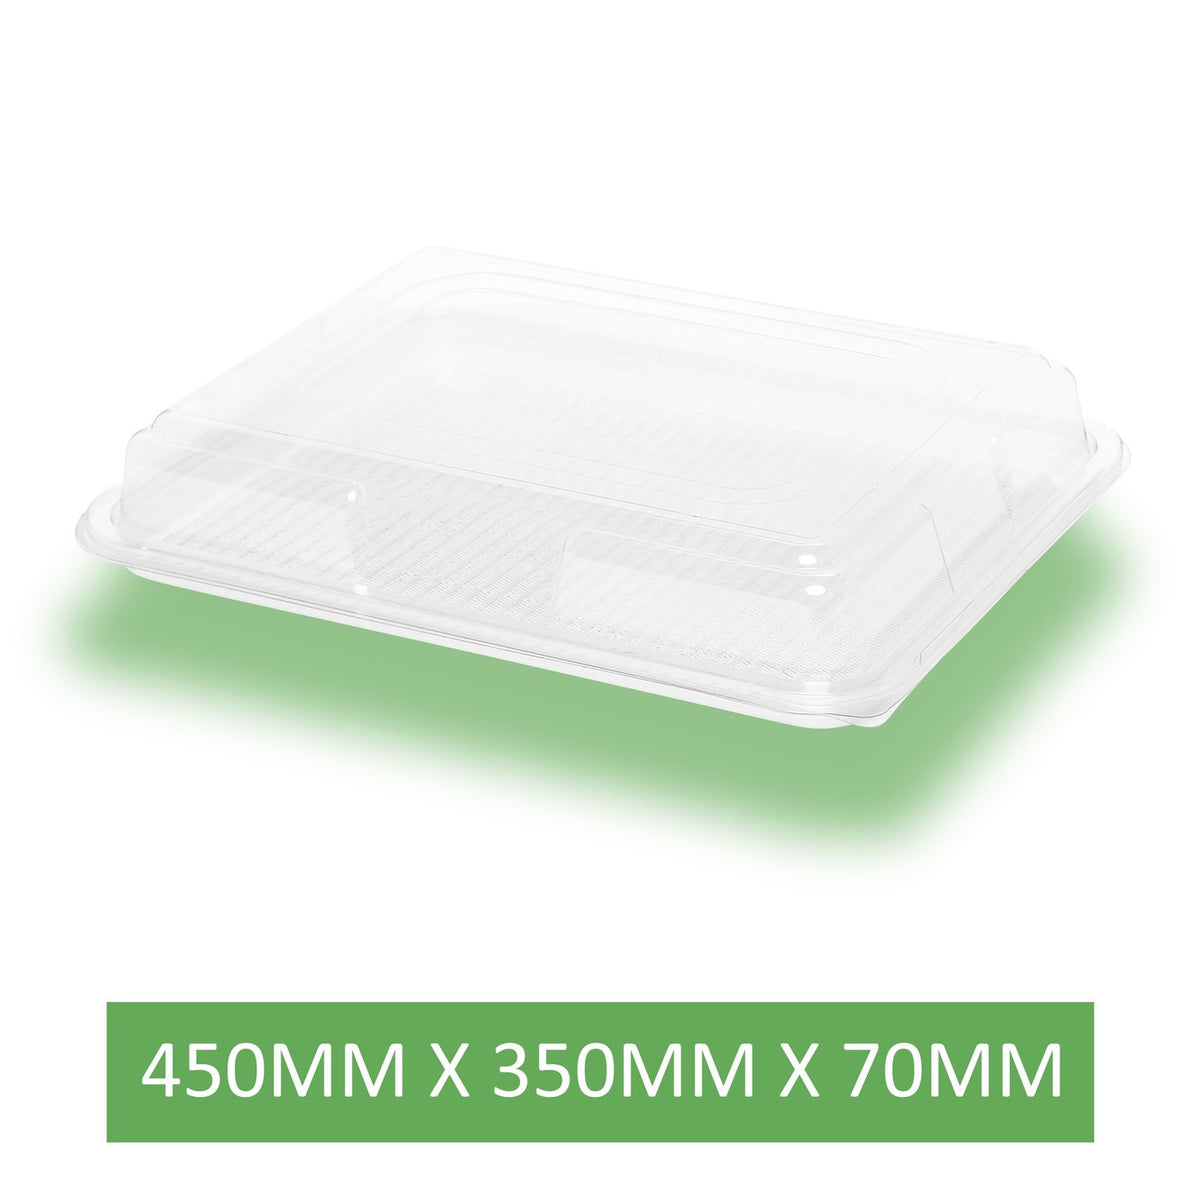 5 x Large Clear Base & Clear Lid Party Platters -450mm x 310mm x 75mm - Caterline -